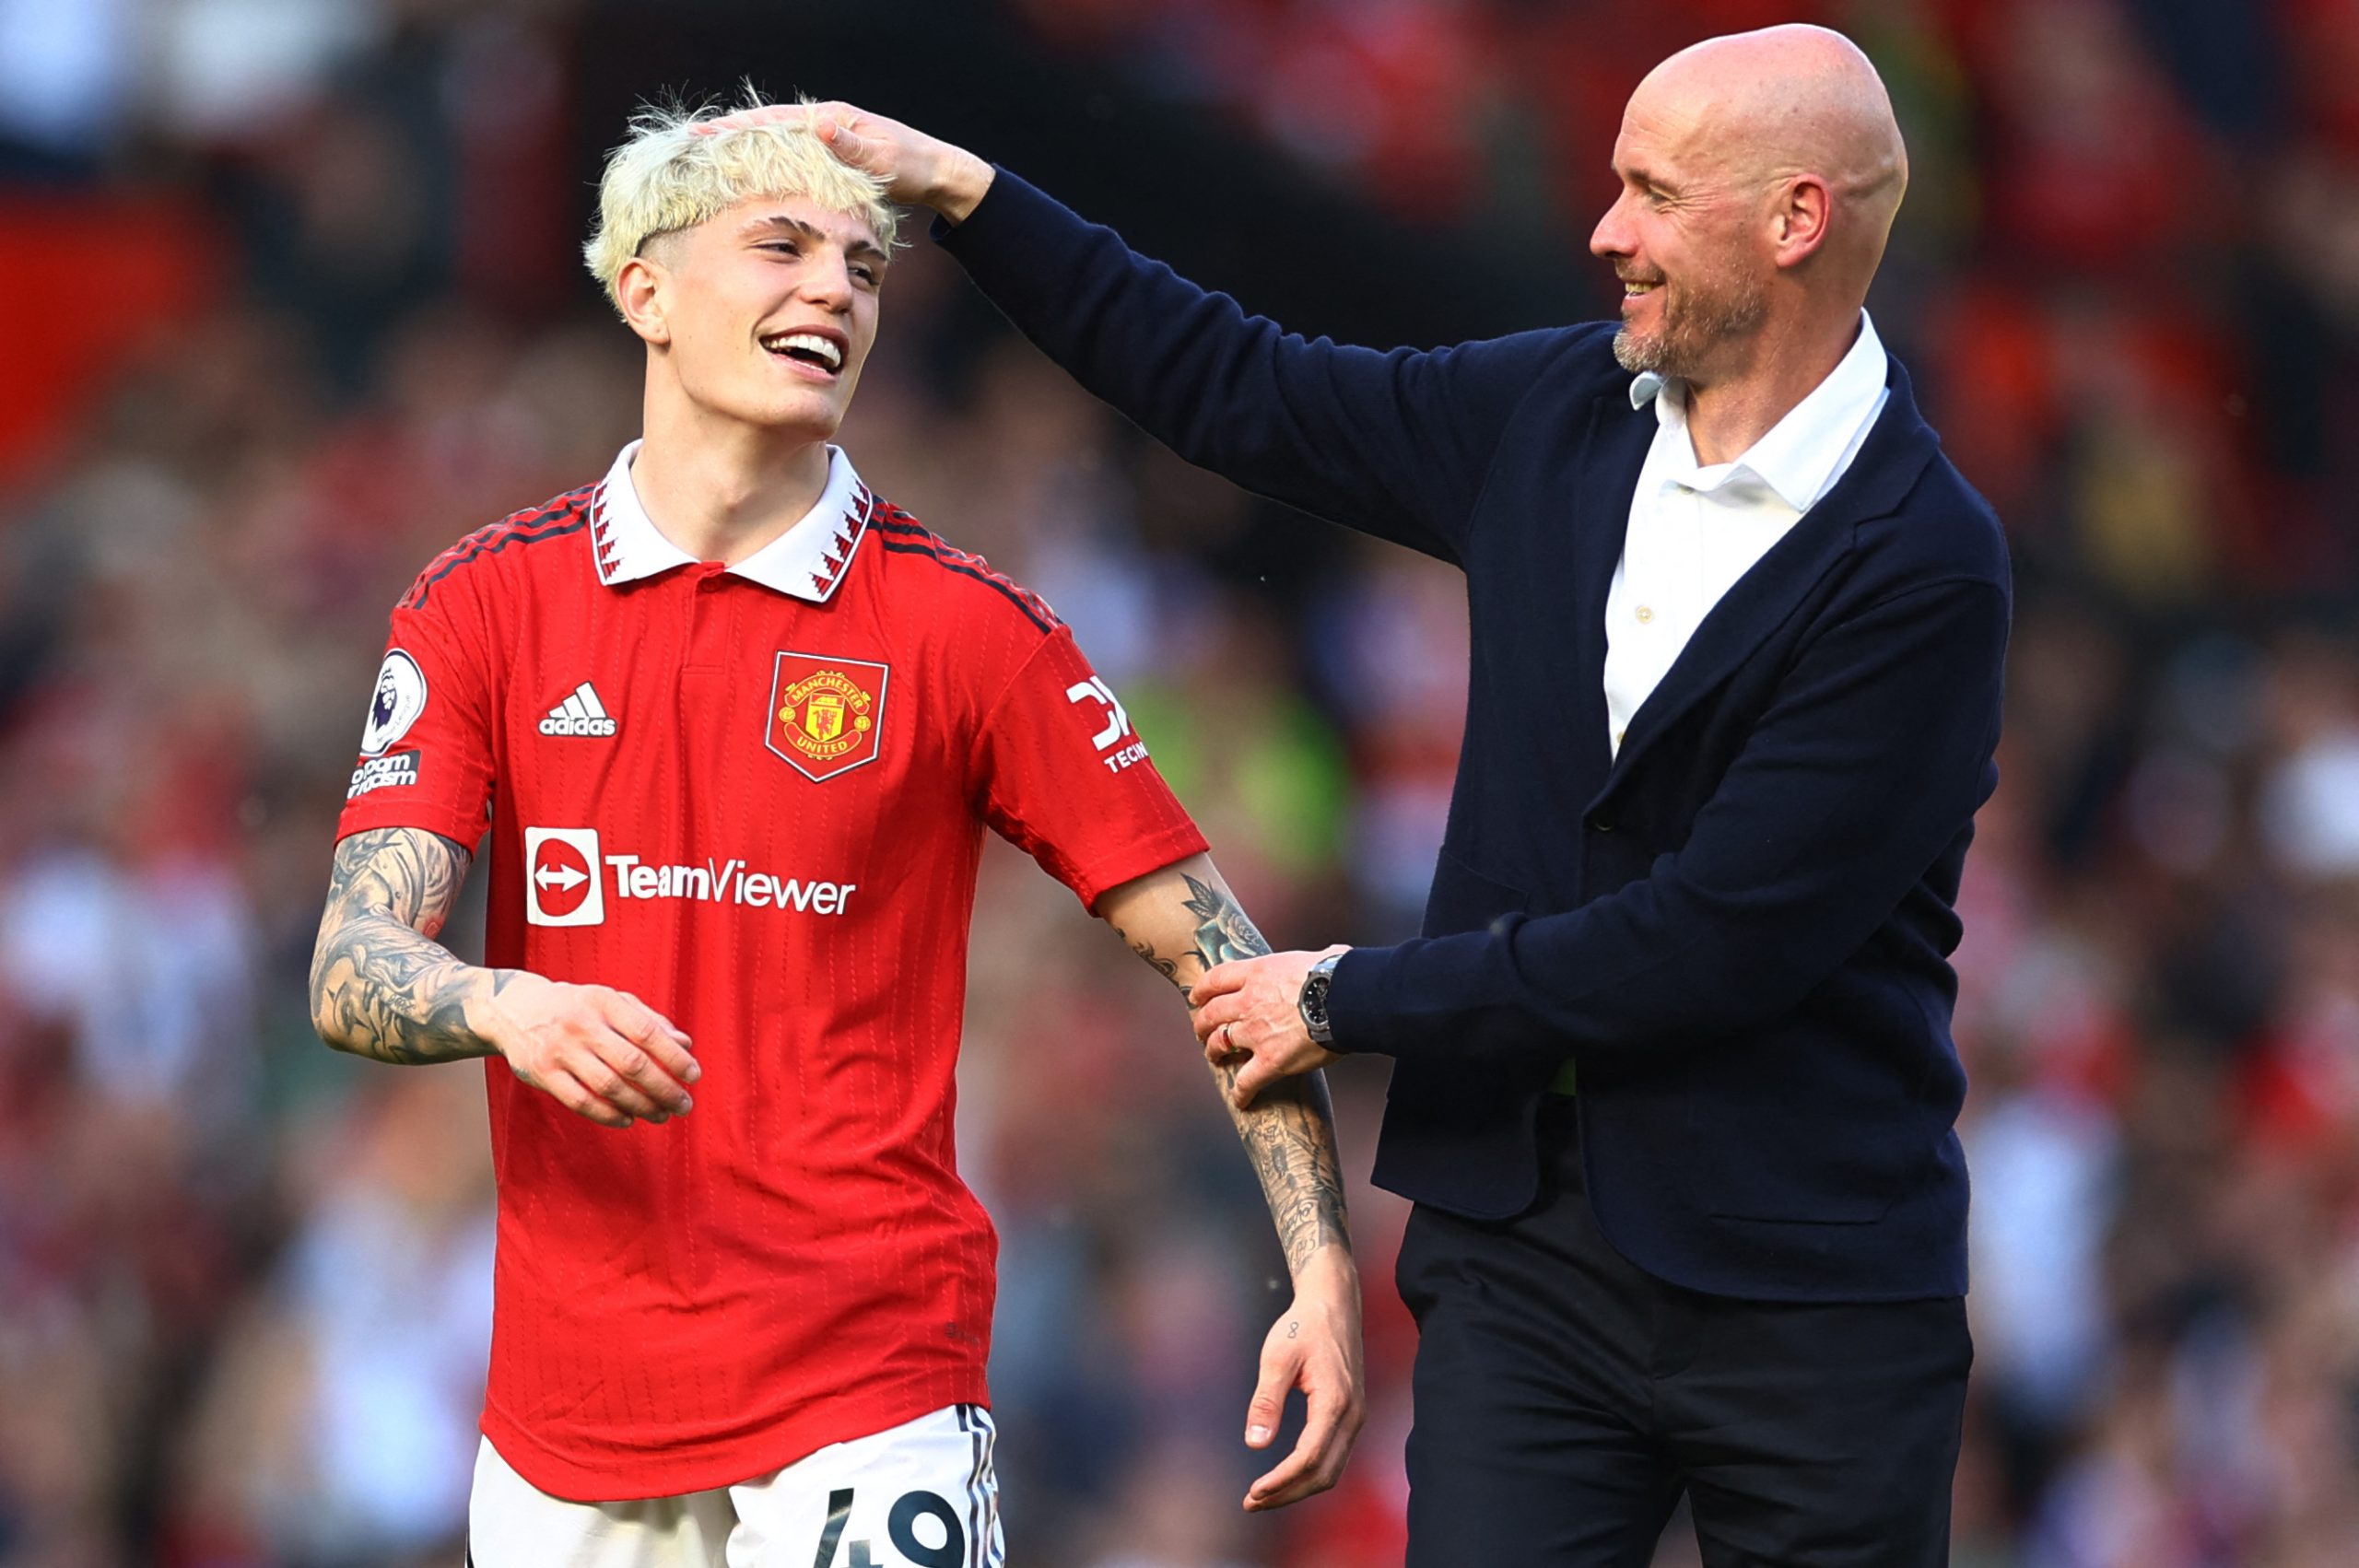 Garnacho's Brilliance: Securing His Role as Crucial to Man United's Future Under Ten Hag